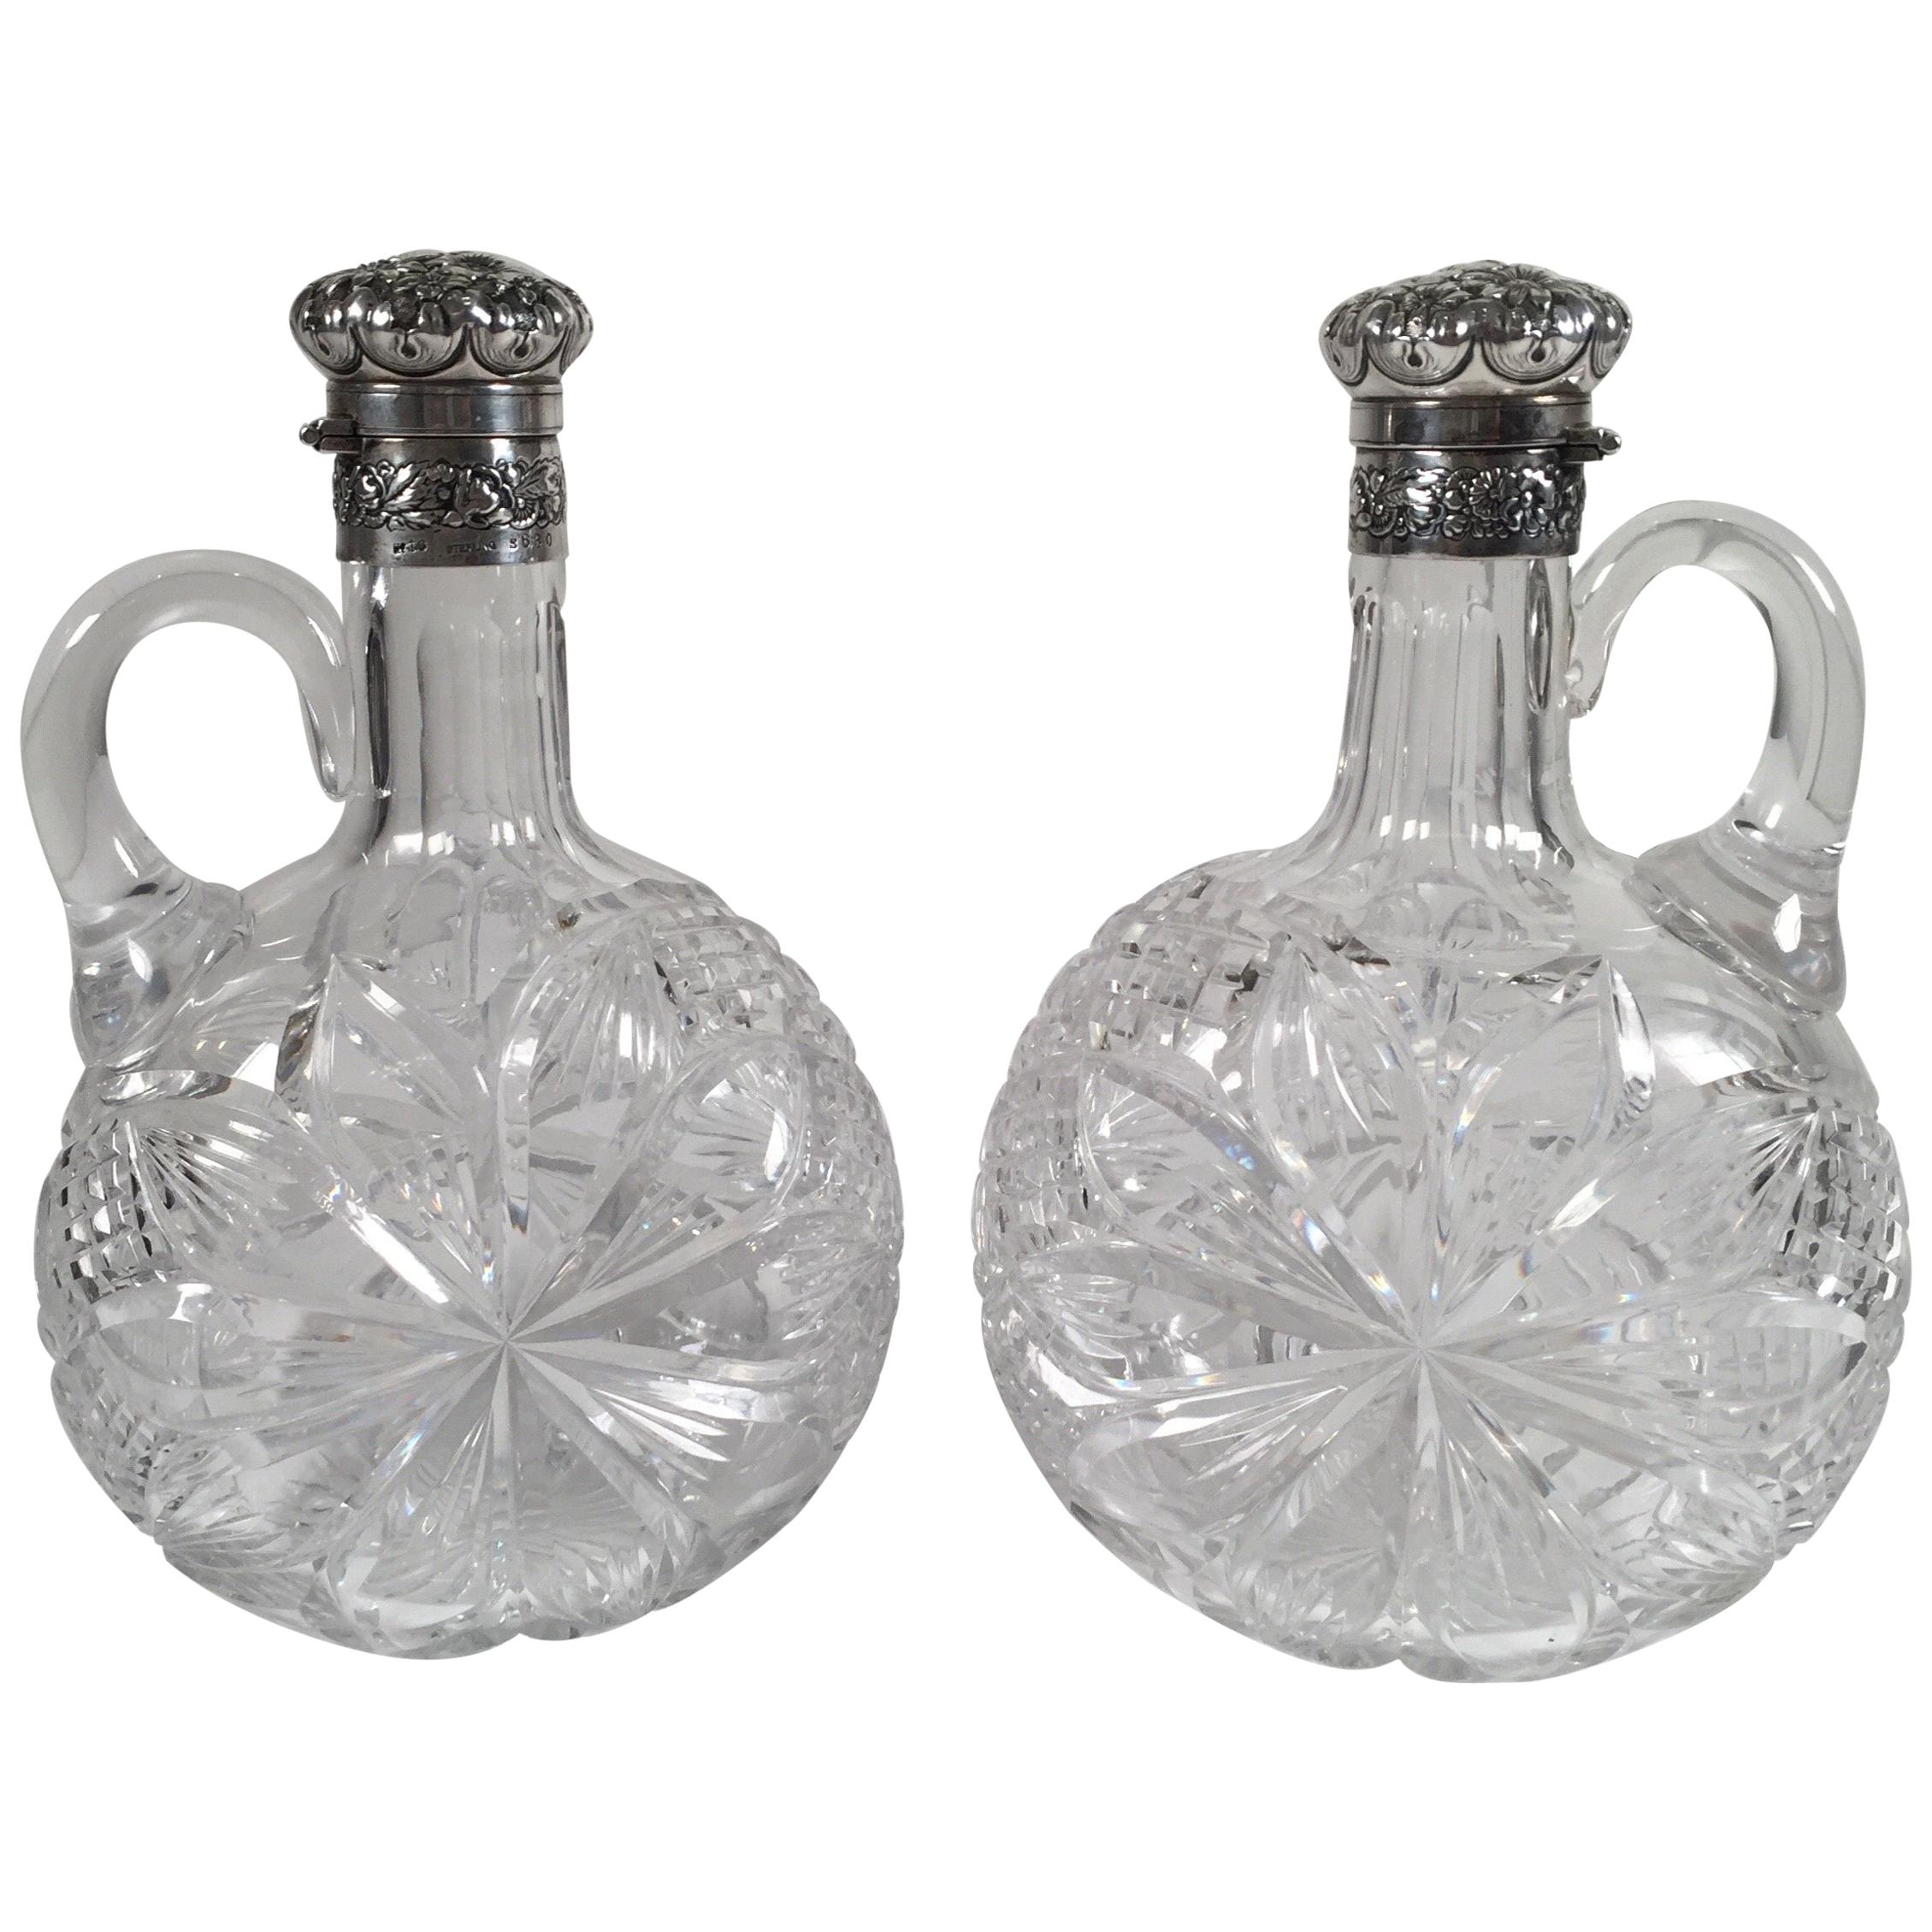 Fine Pair of 19th Century Gorham Sterling and Cut Glass Decanters